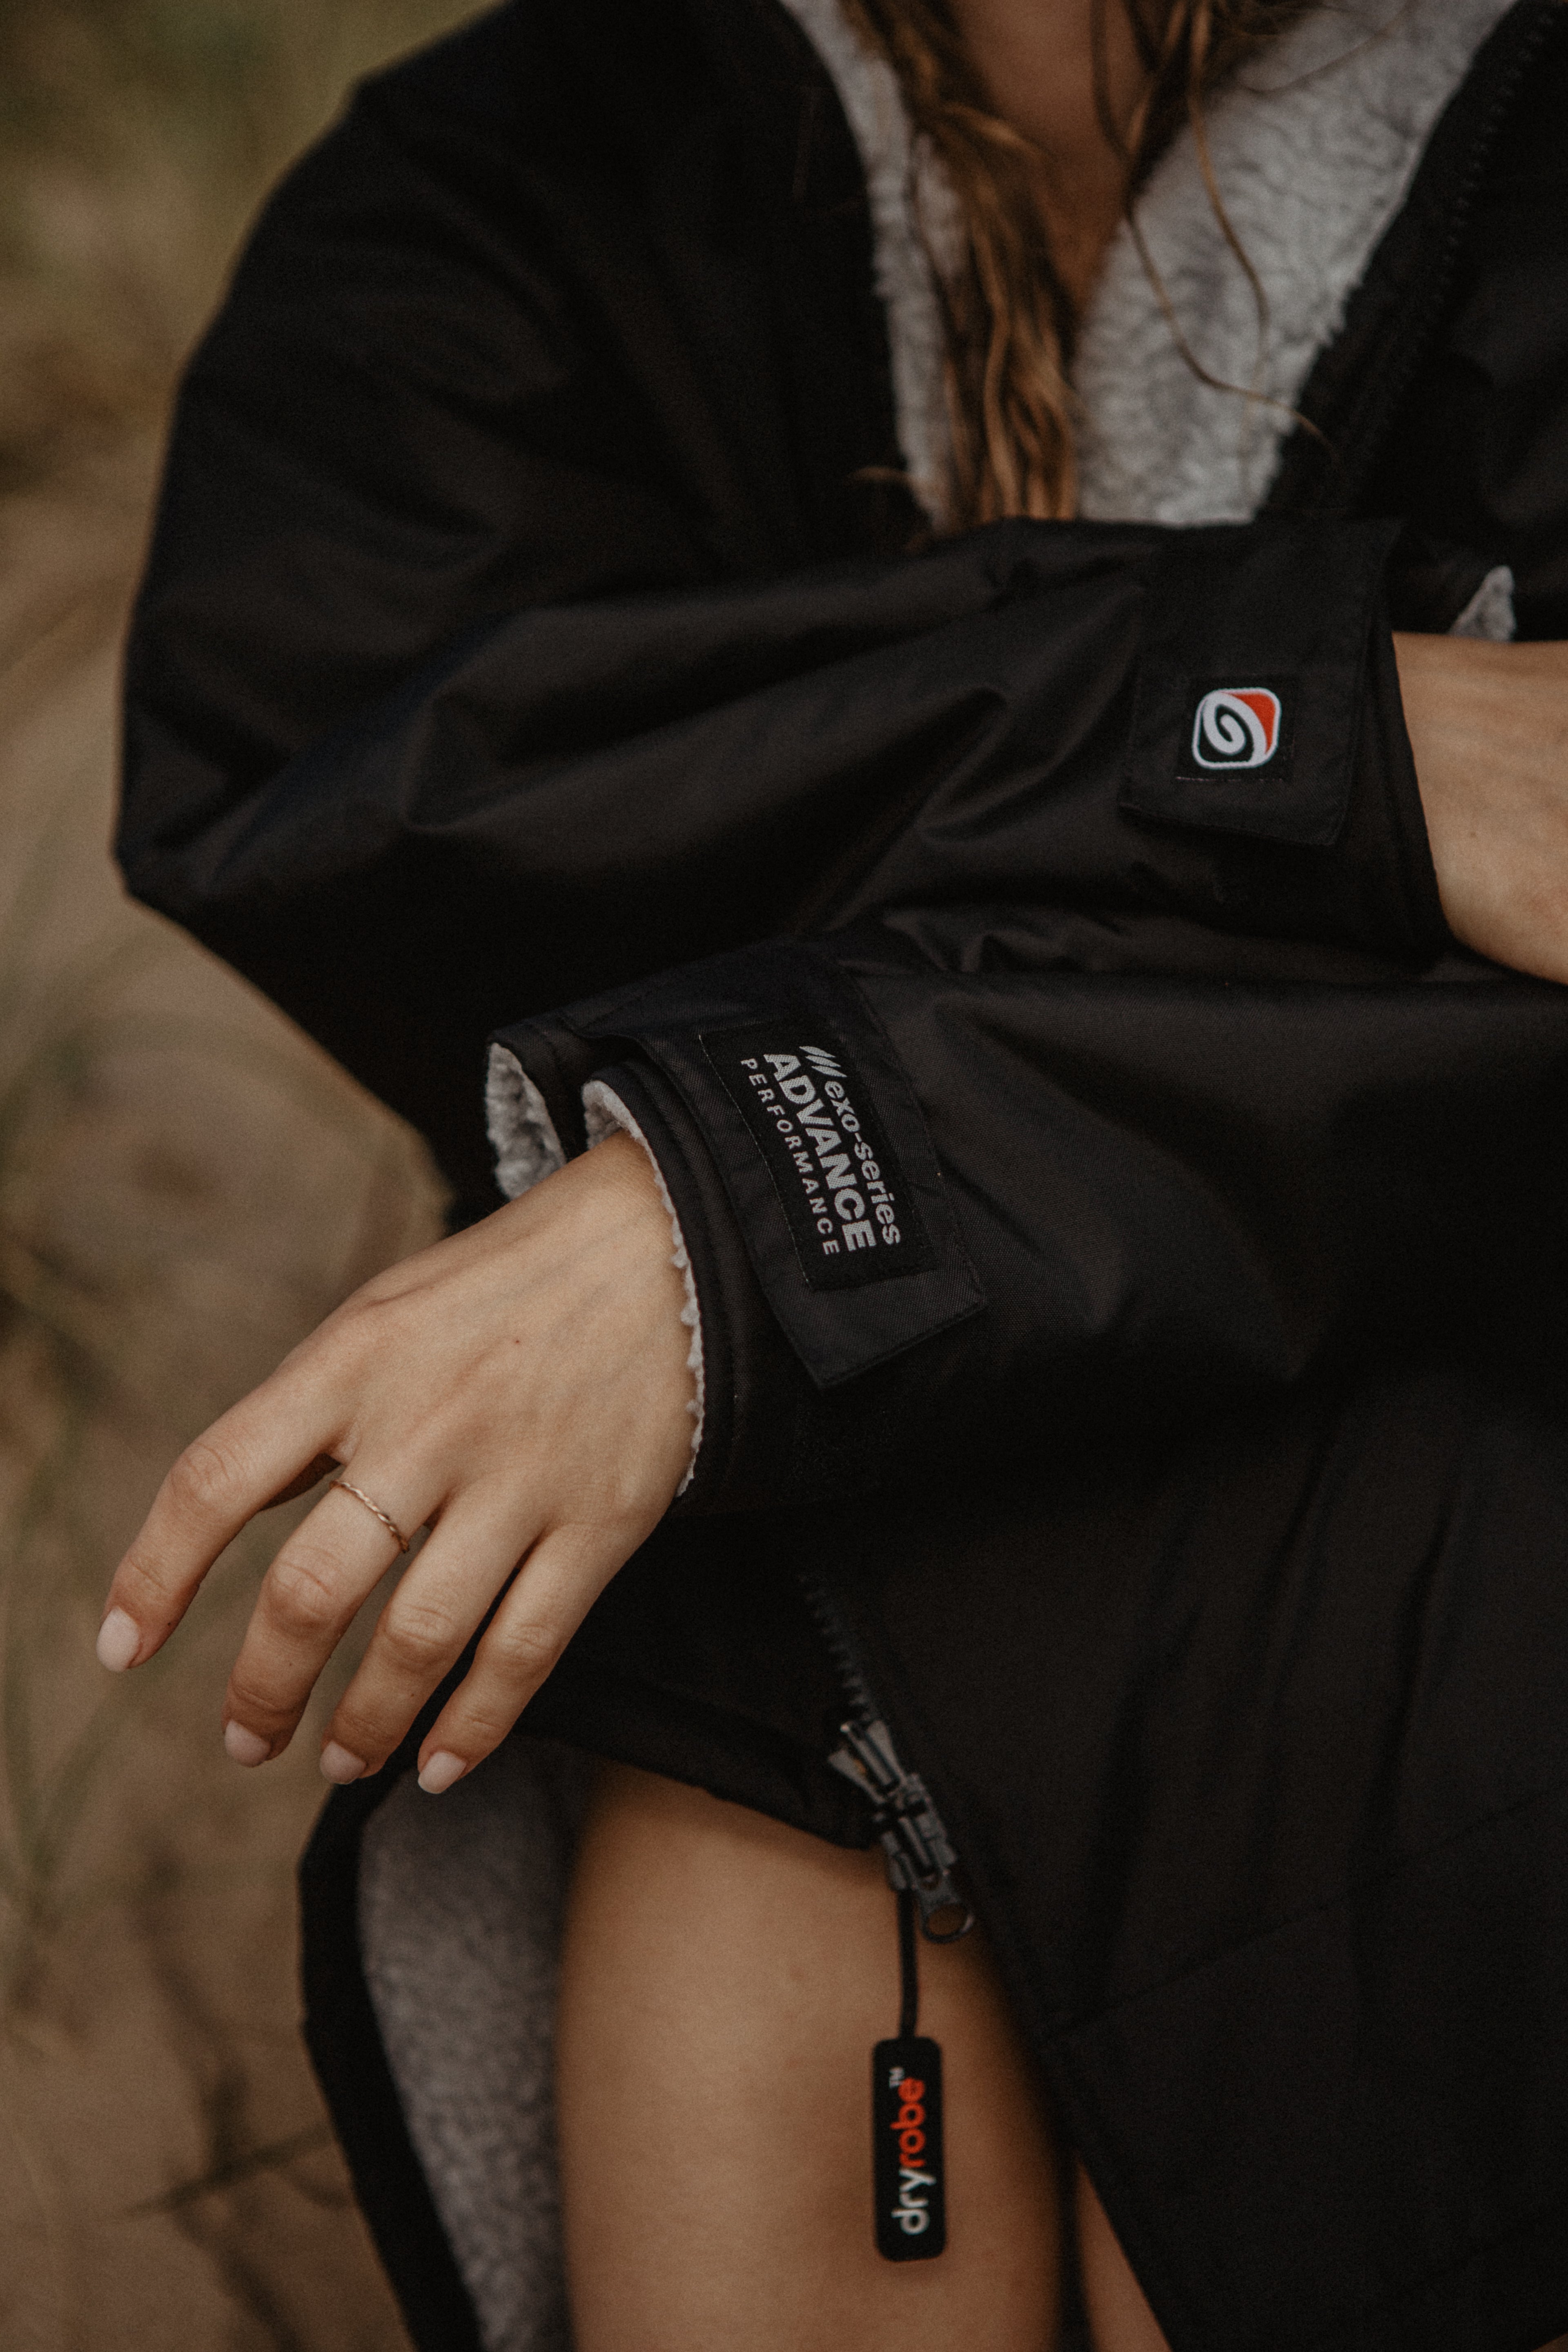 dryrobe Advance Long Sleeve | Showing dryrobe details and logos